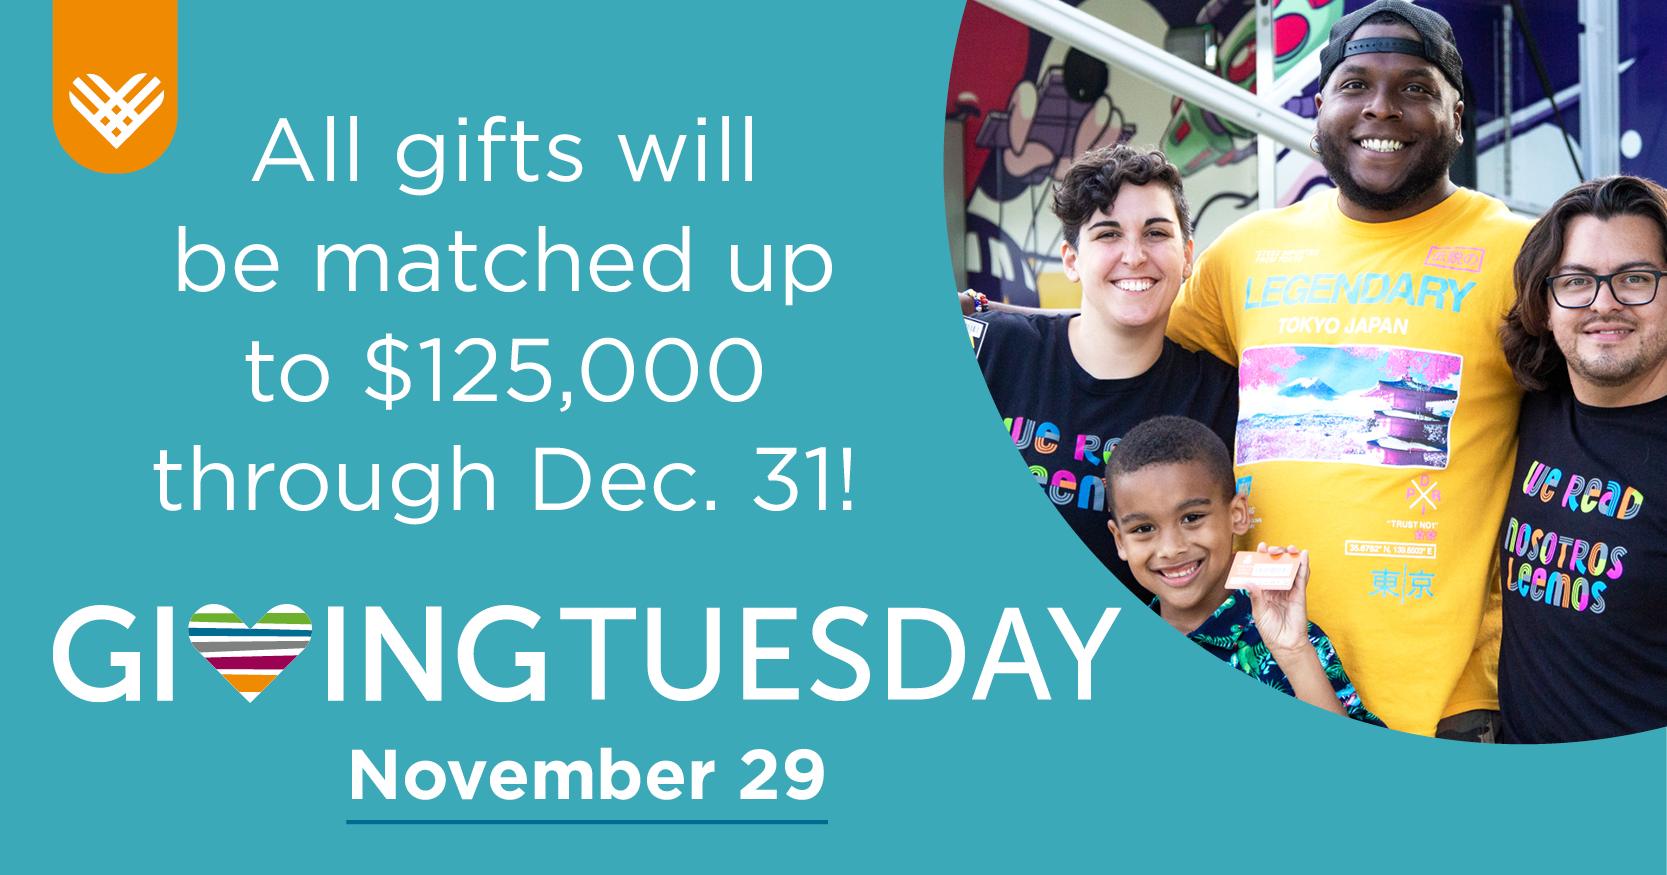 Photo of library staff and child for Giving Tuesday – November 29 – All gifts will be matched up to $125,000 through Dec. 31!